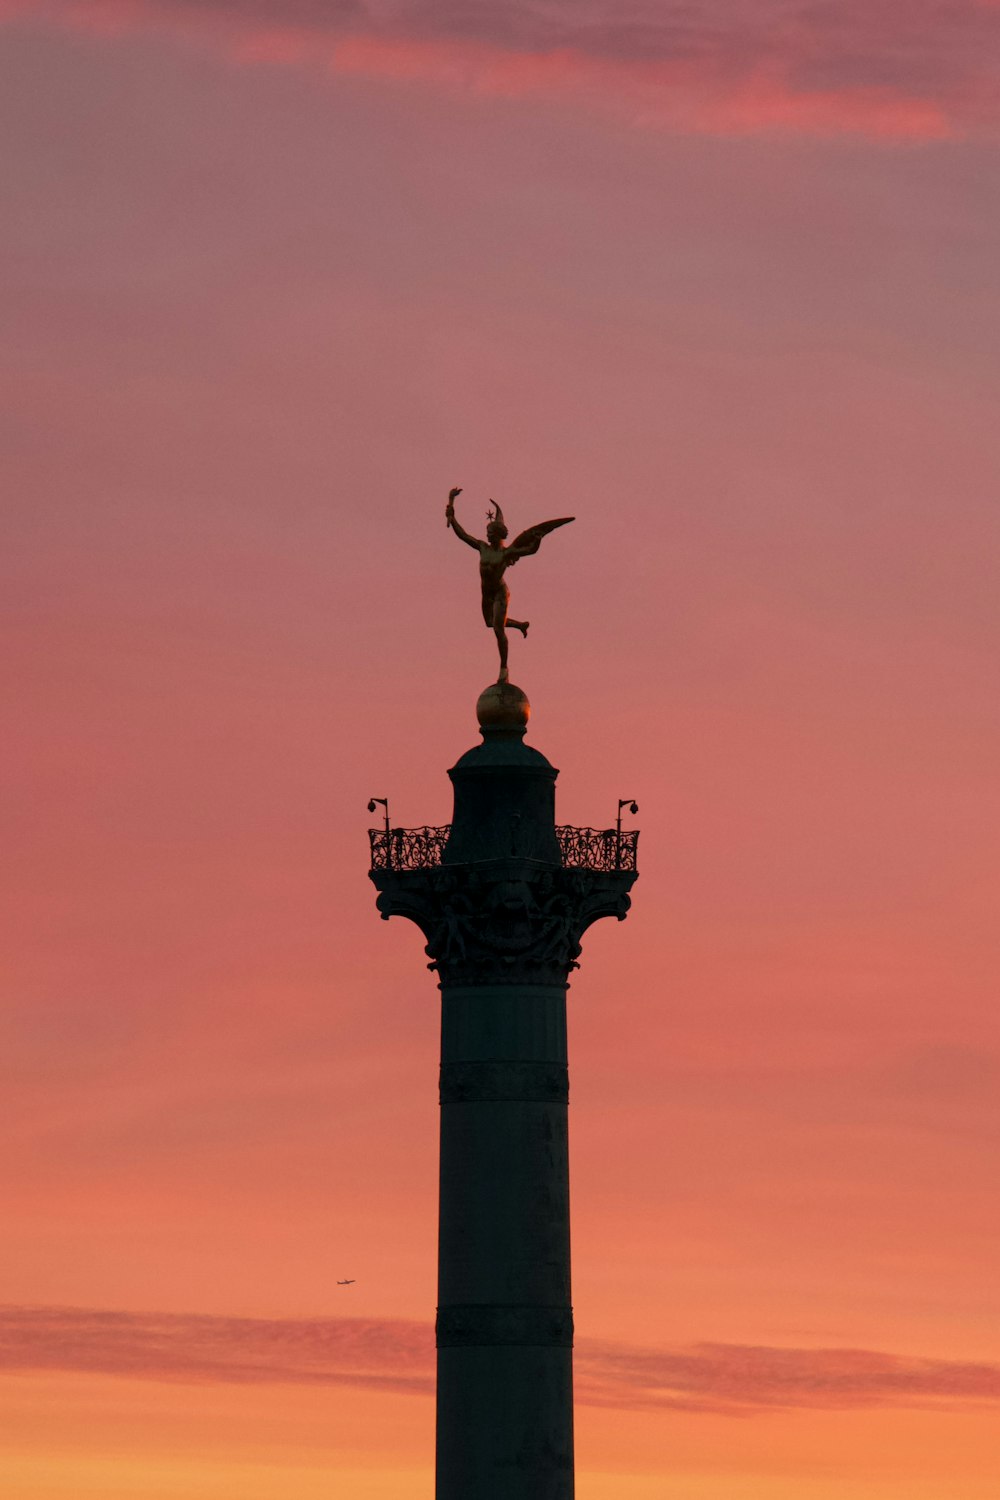 a statue on top of a tower with a bird on top of it